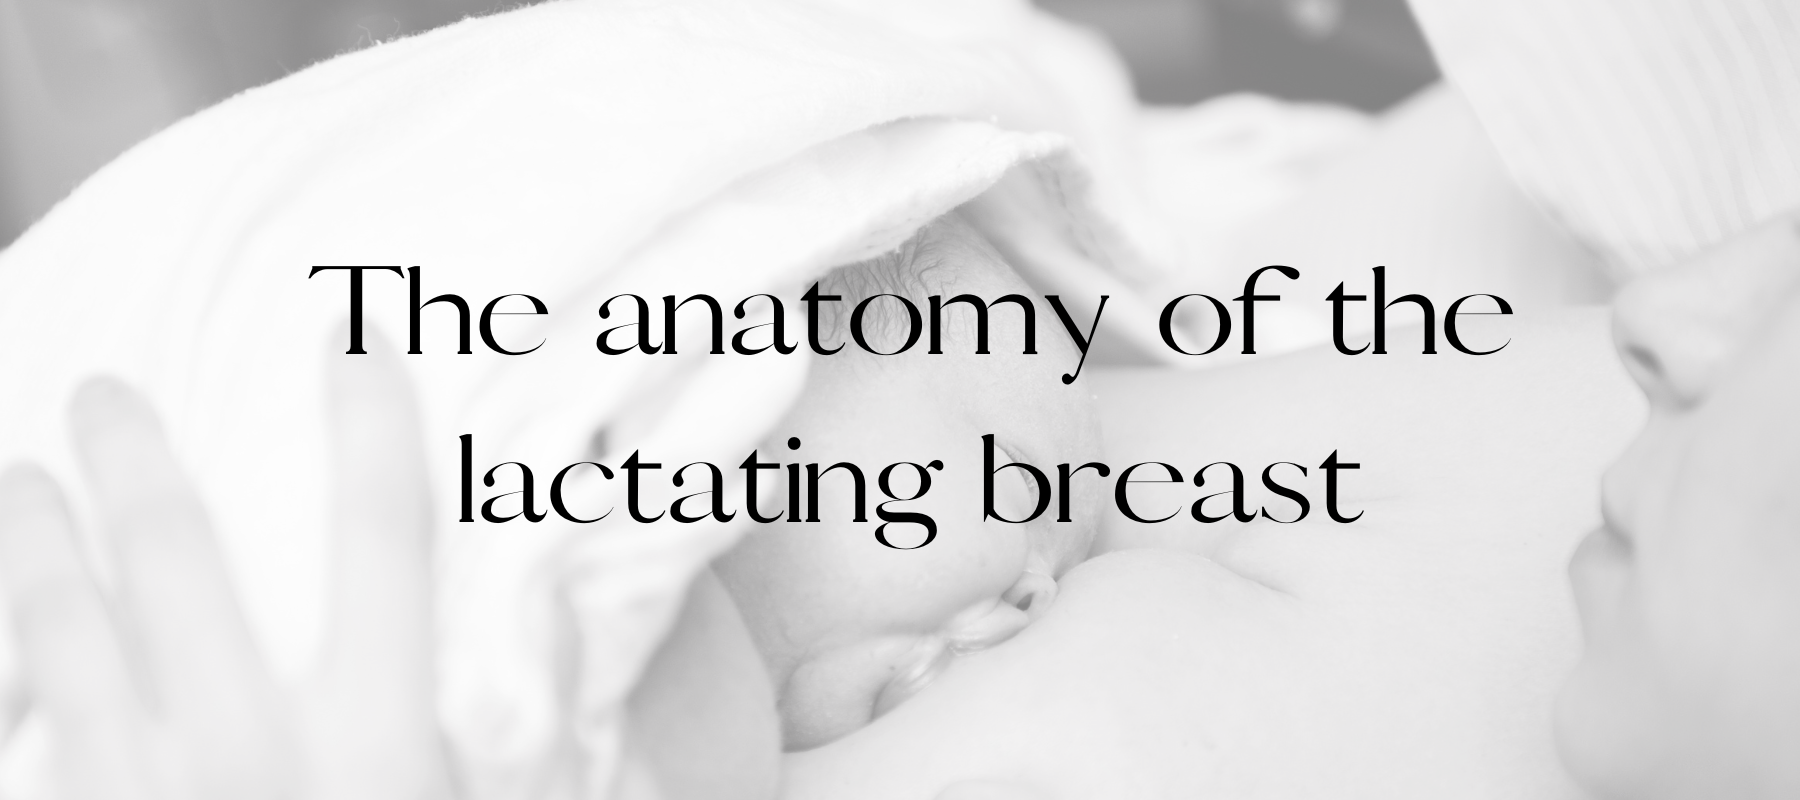 Understanding the Anatomy of the Lactating Breast